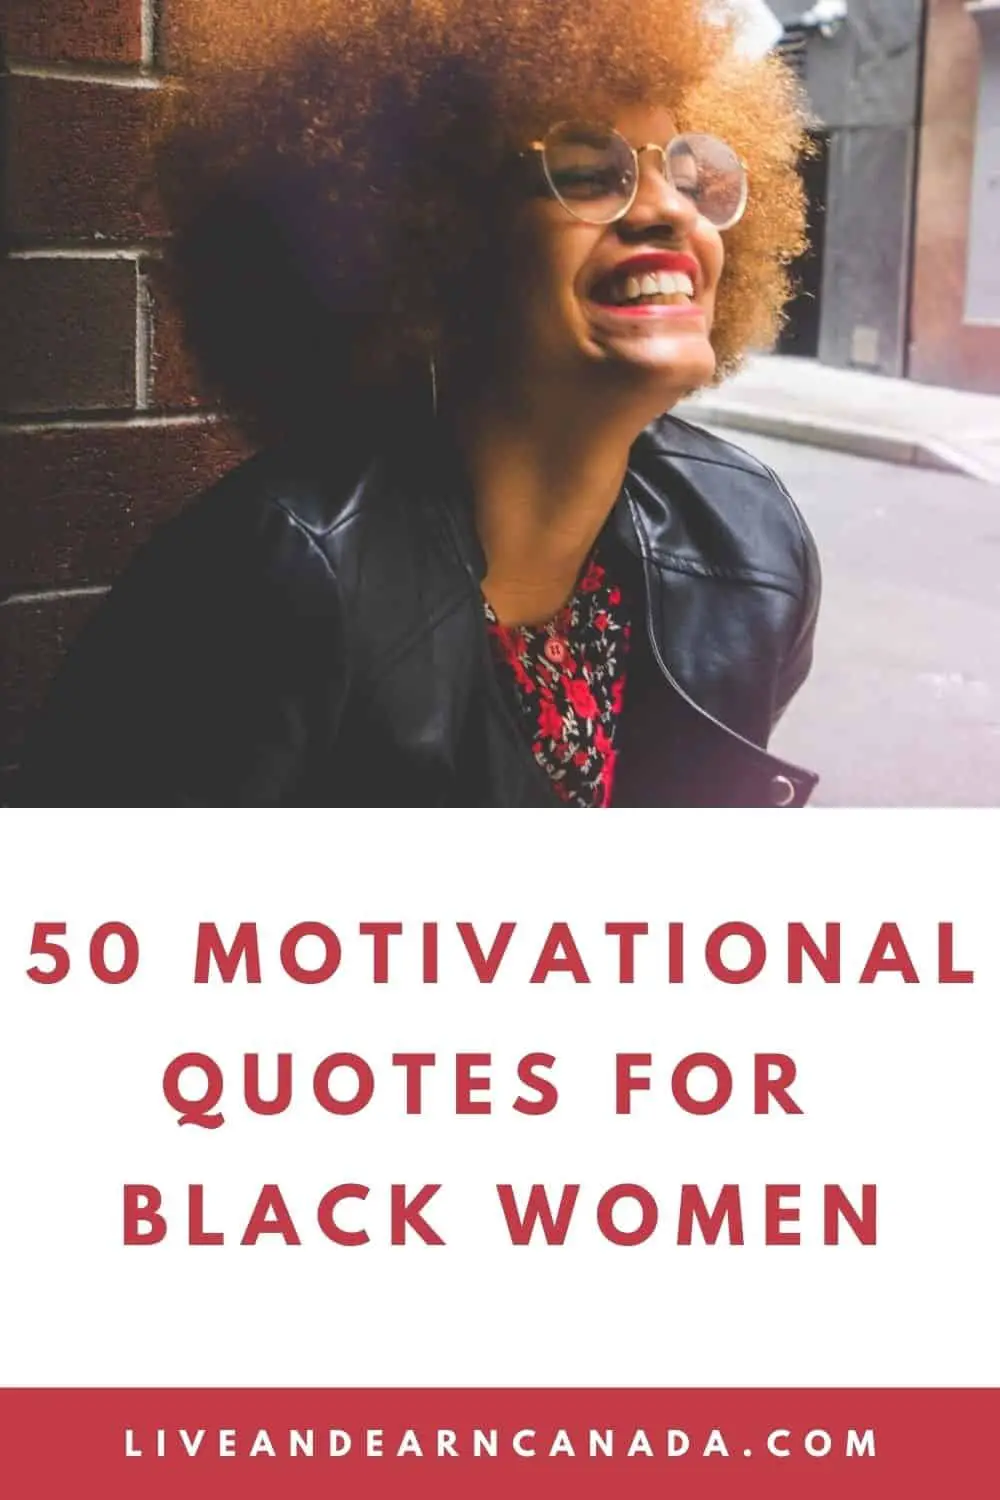 50 Inspirational Strong Women Quotes! Here is a list of the best quotes to motivate black women! 50 Quotes About Hope and Strength From Famous Black Women and regular black women!